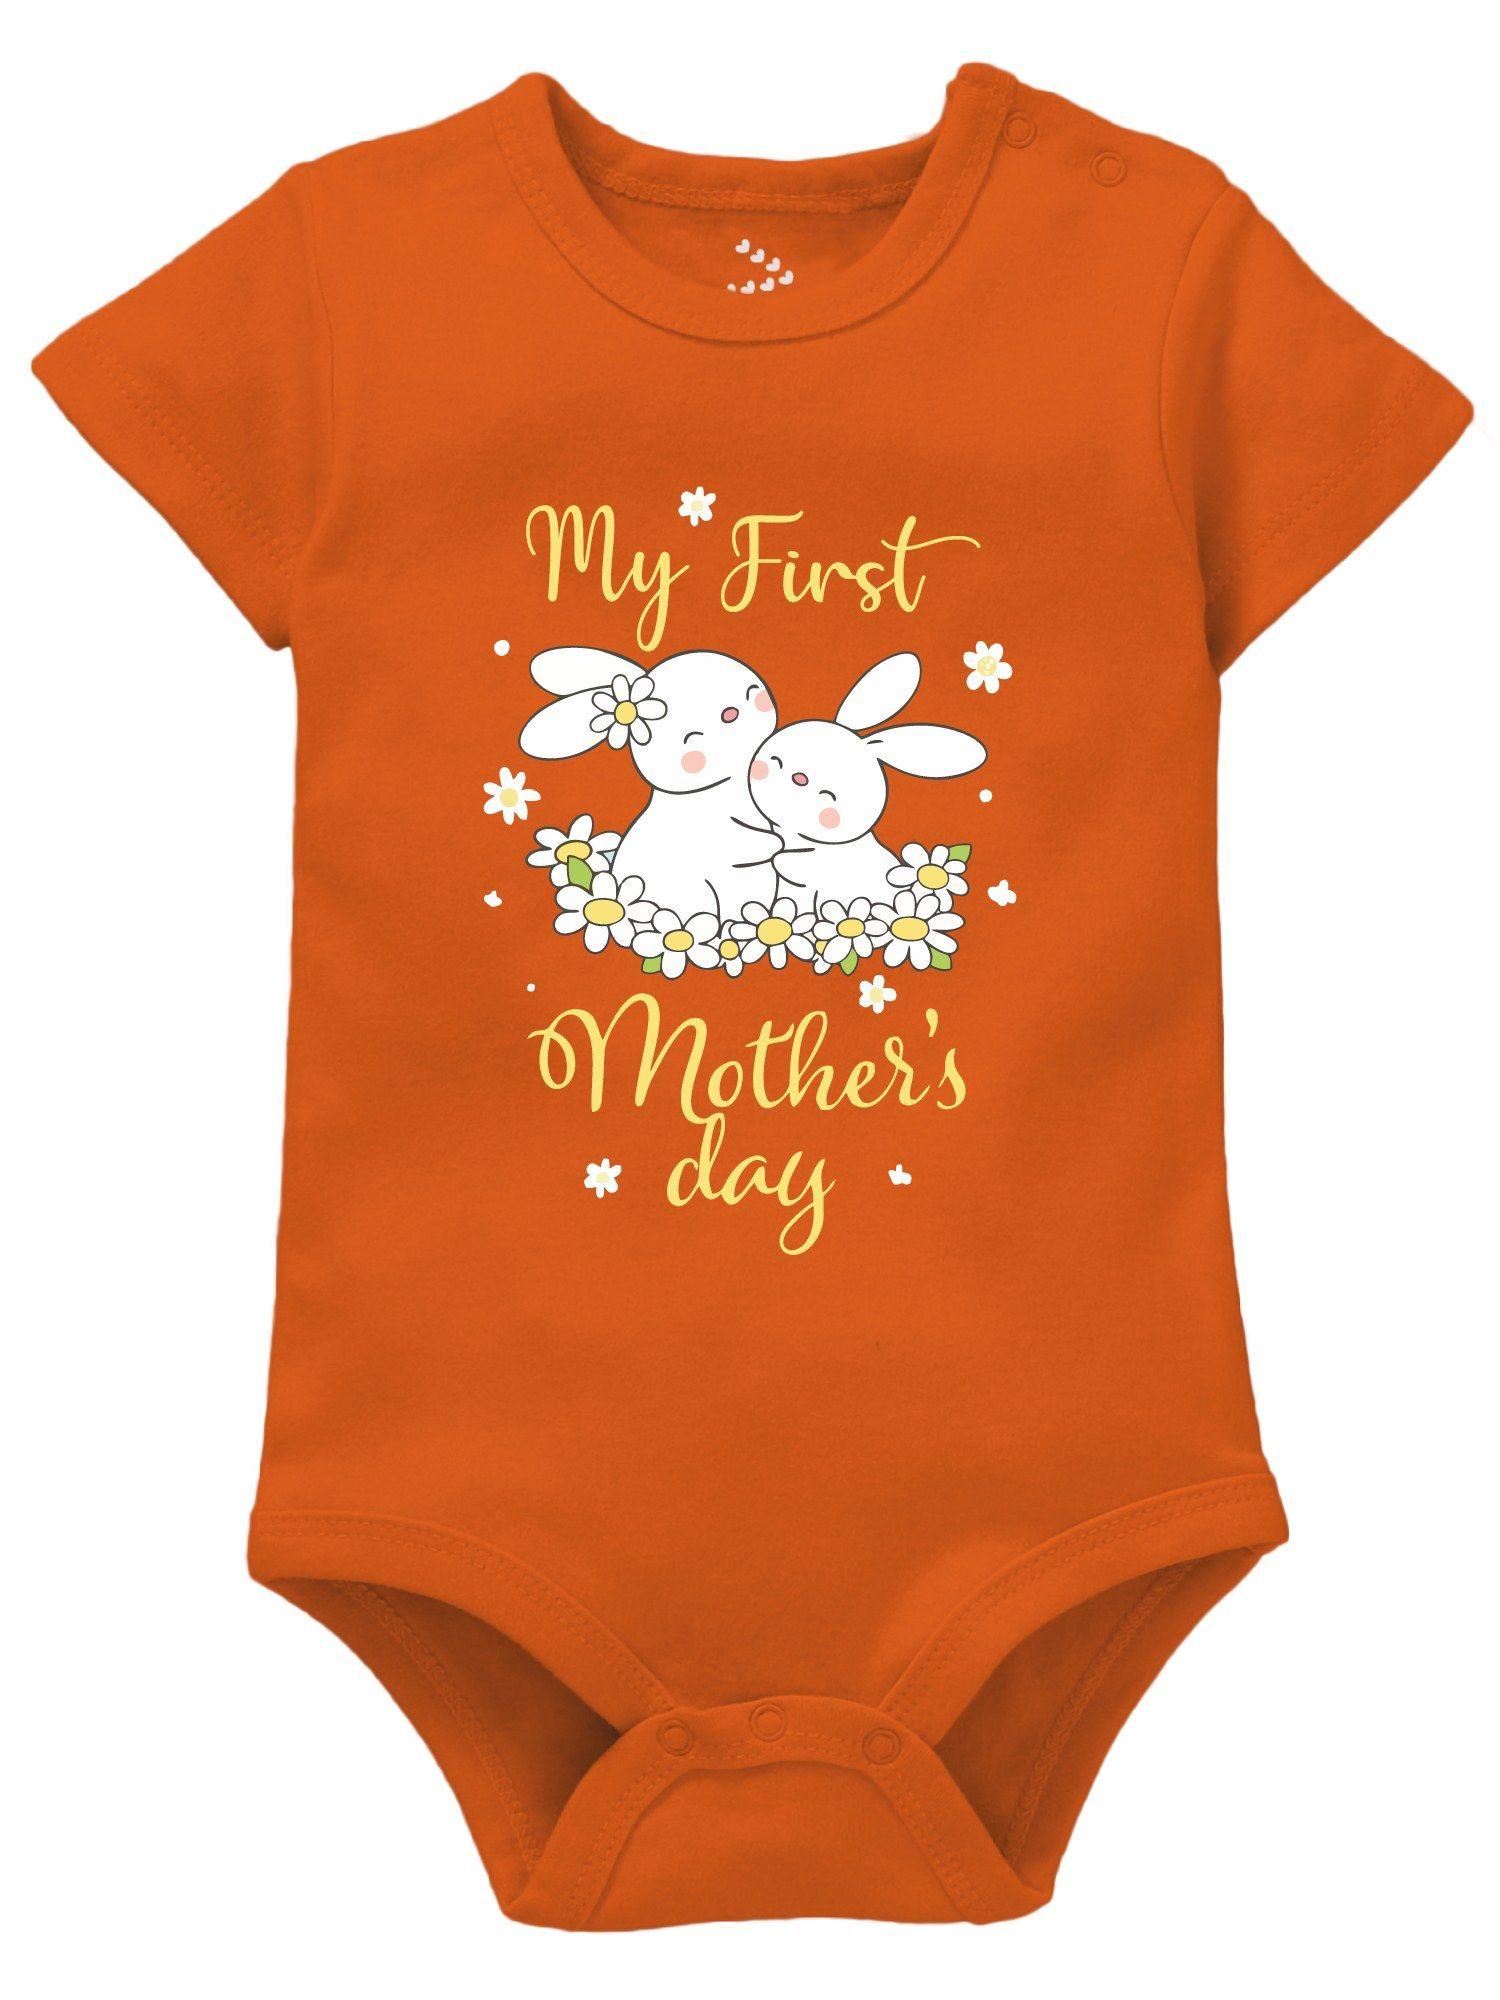 my-first-mothers-day-baby-bodysuit-outfit-newborn-orange